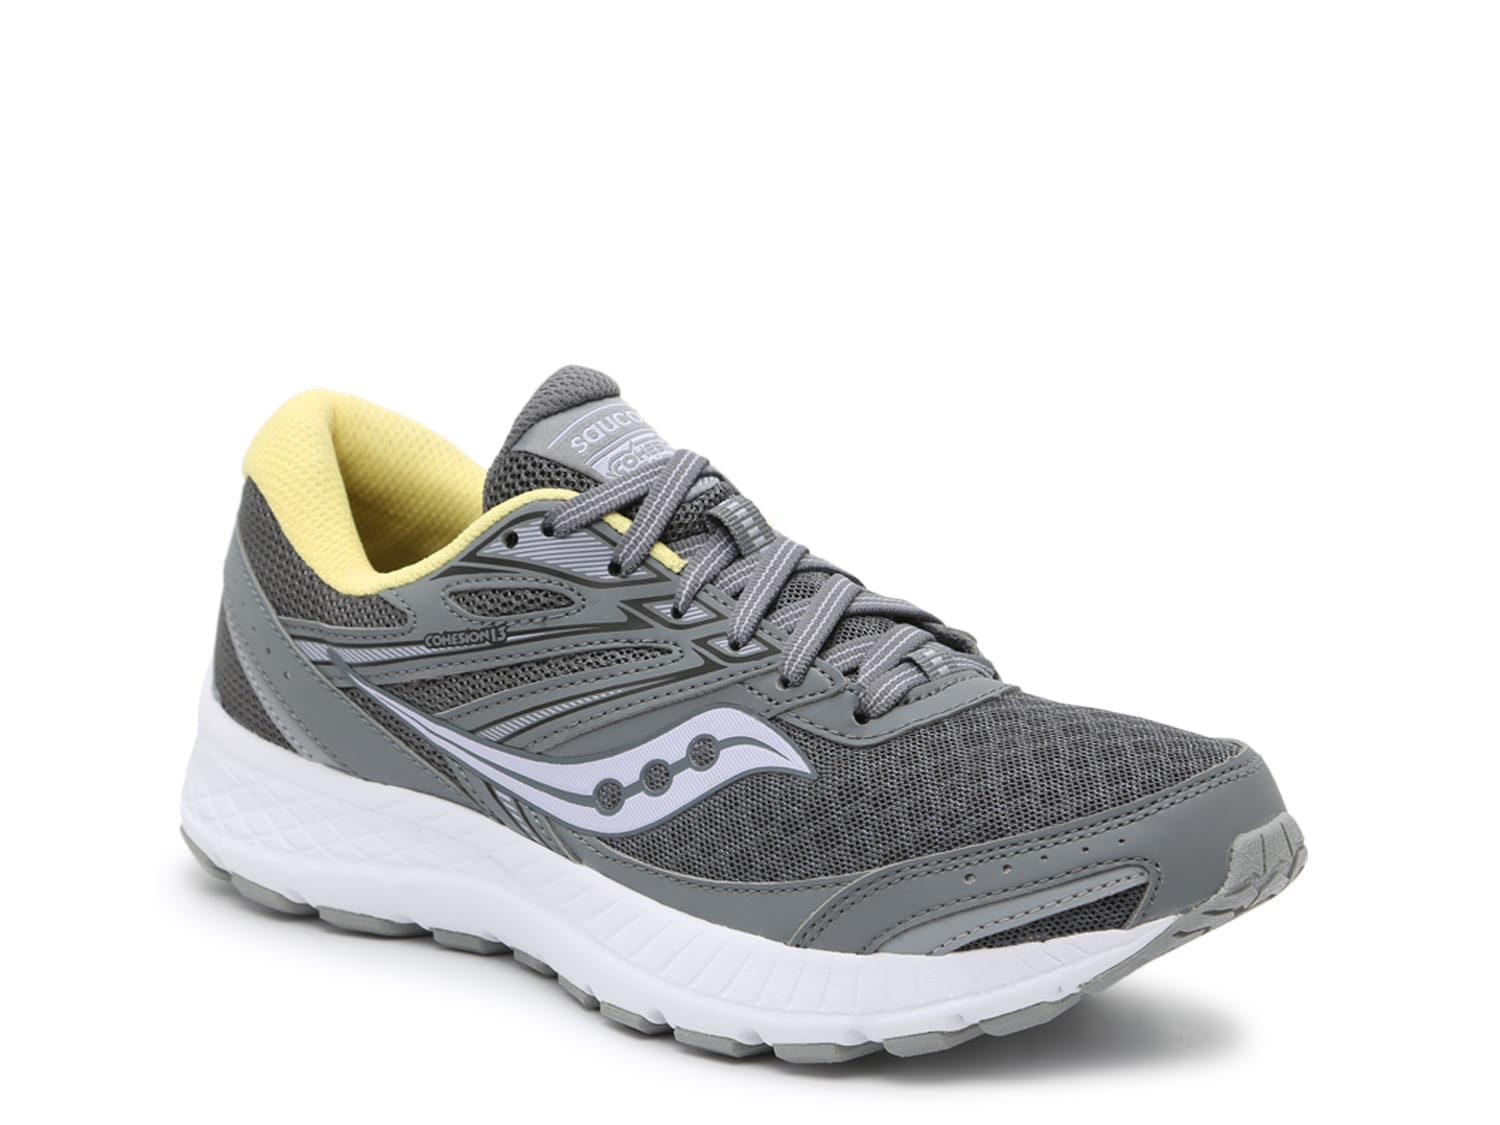 Saucony Shoes, Sneakers, Running Shoes 